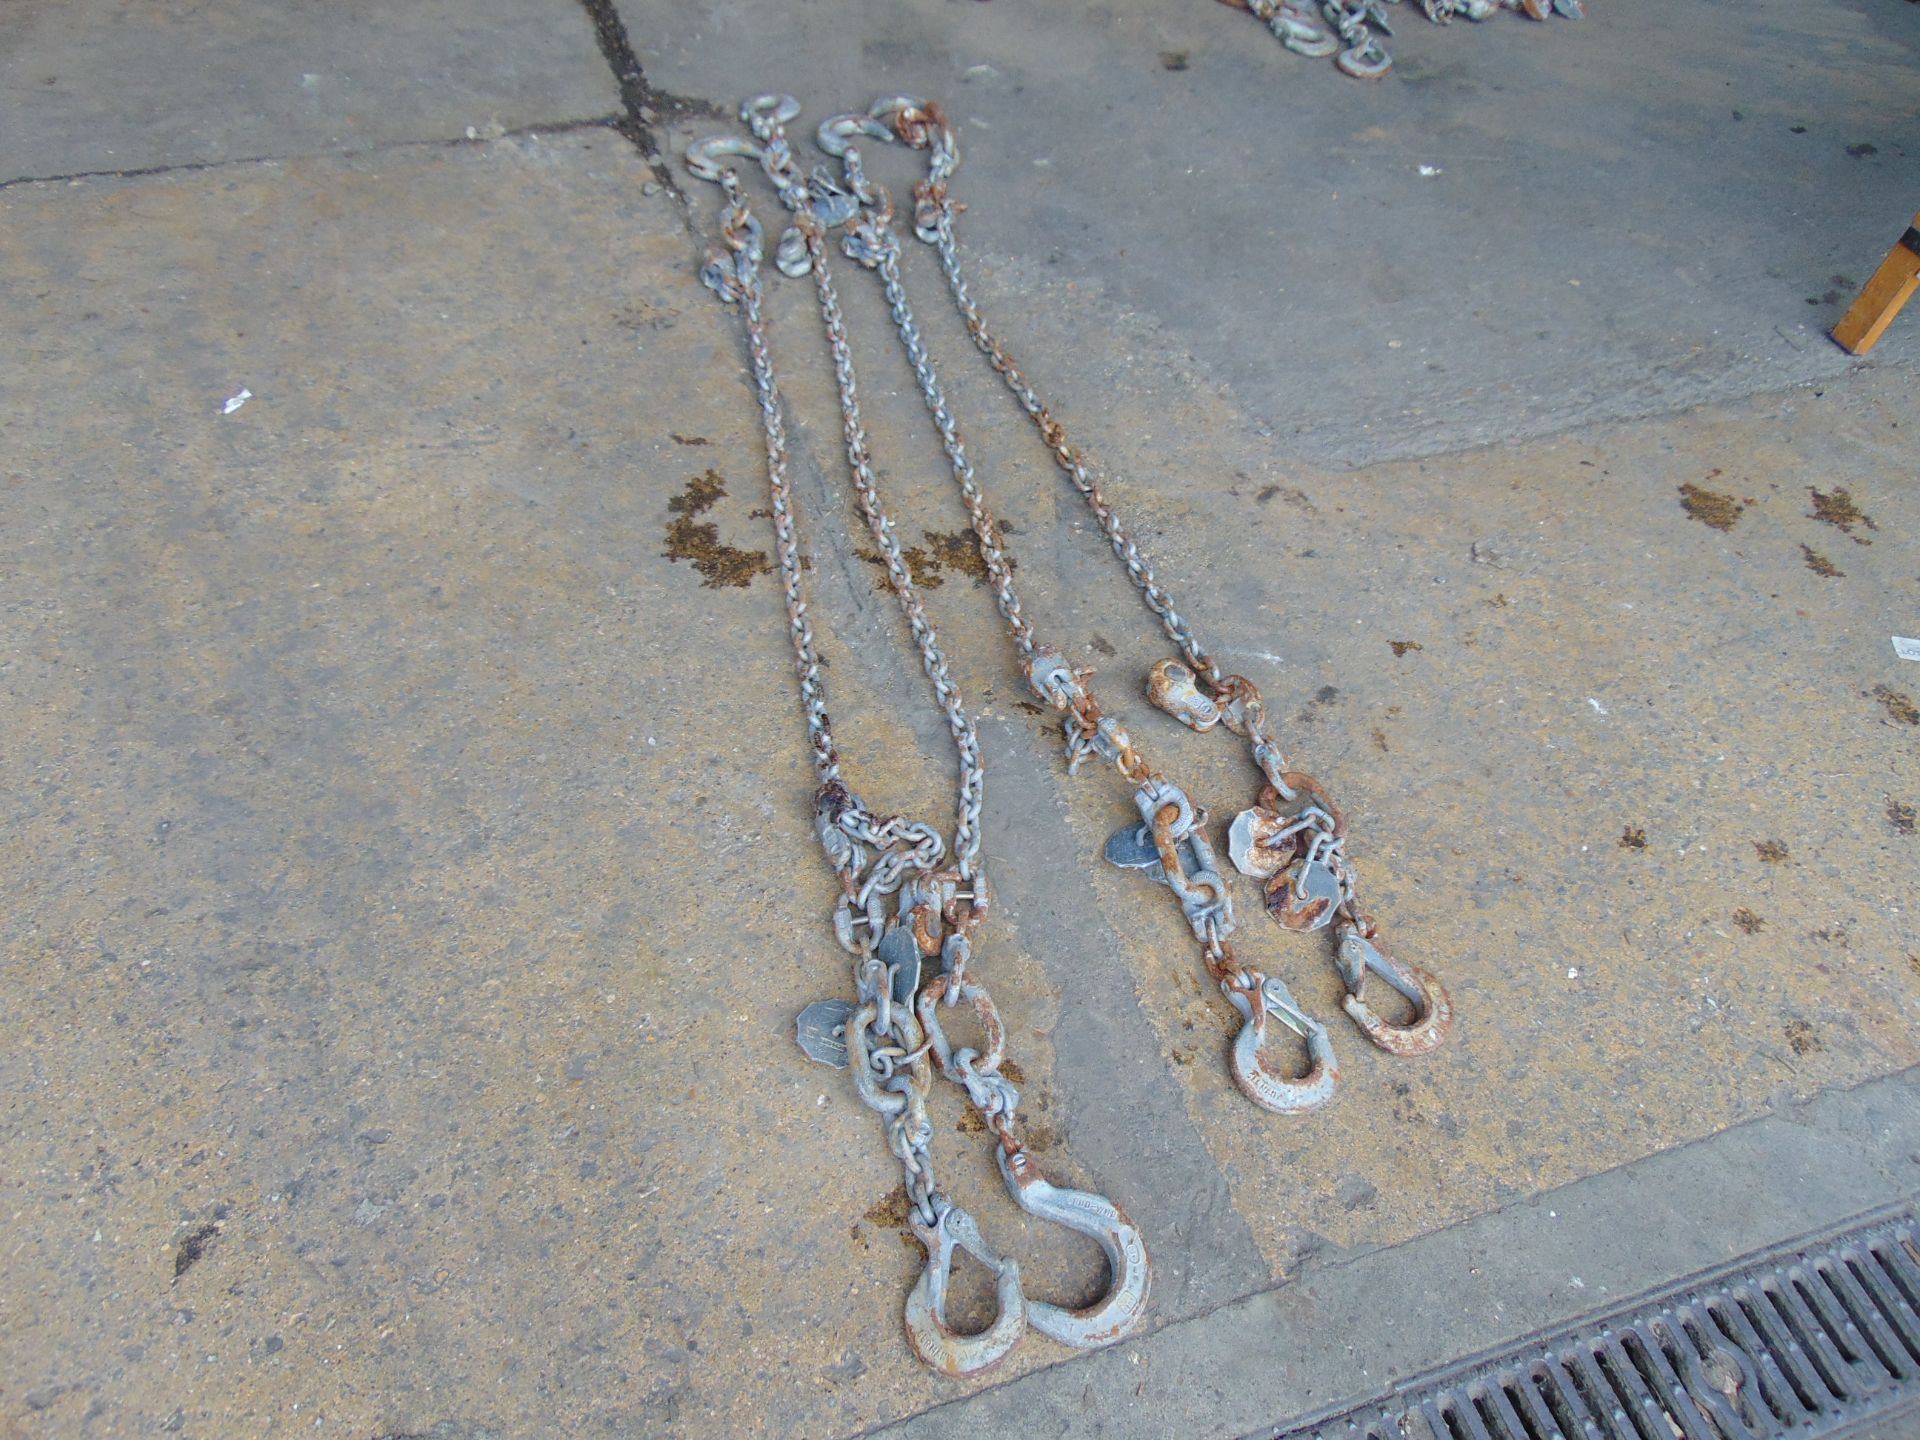 4 x 6ft Heavy-Duty Chains - Image 3 of 4